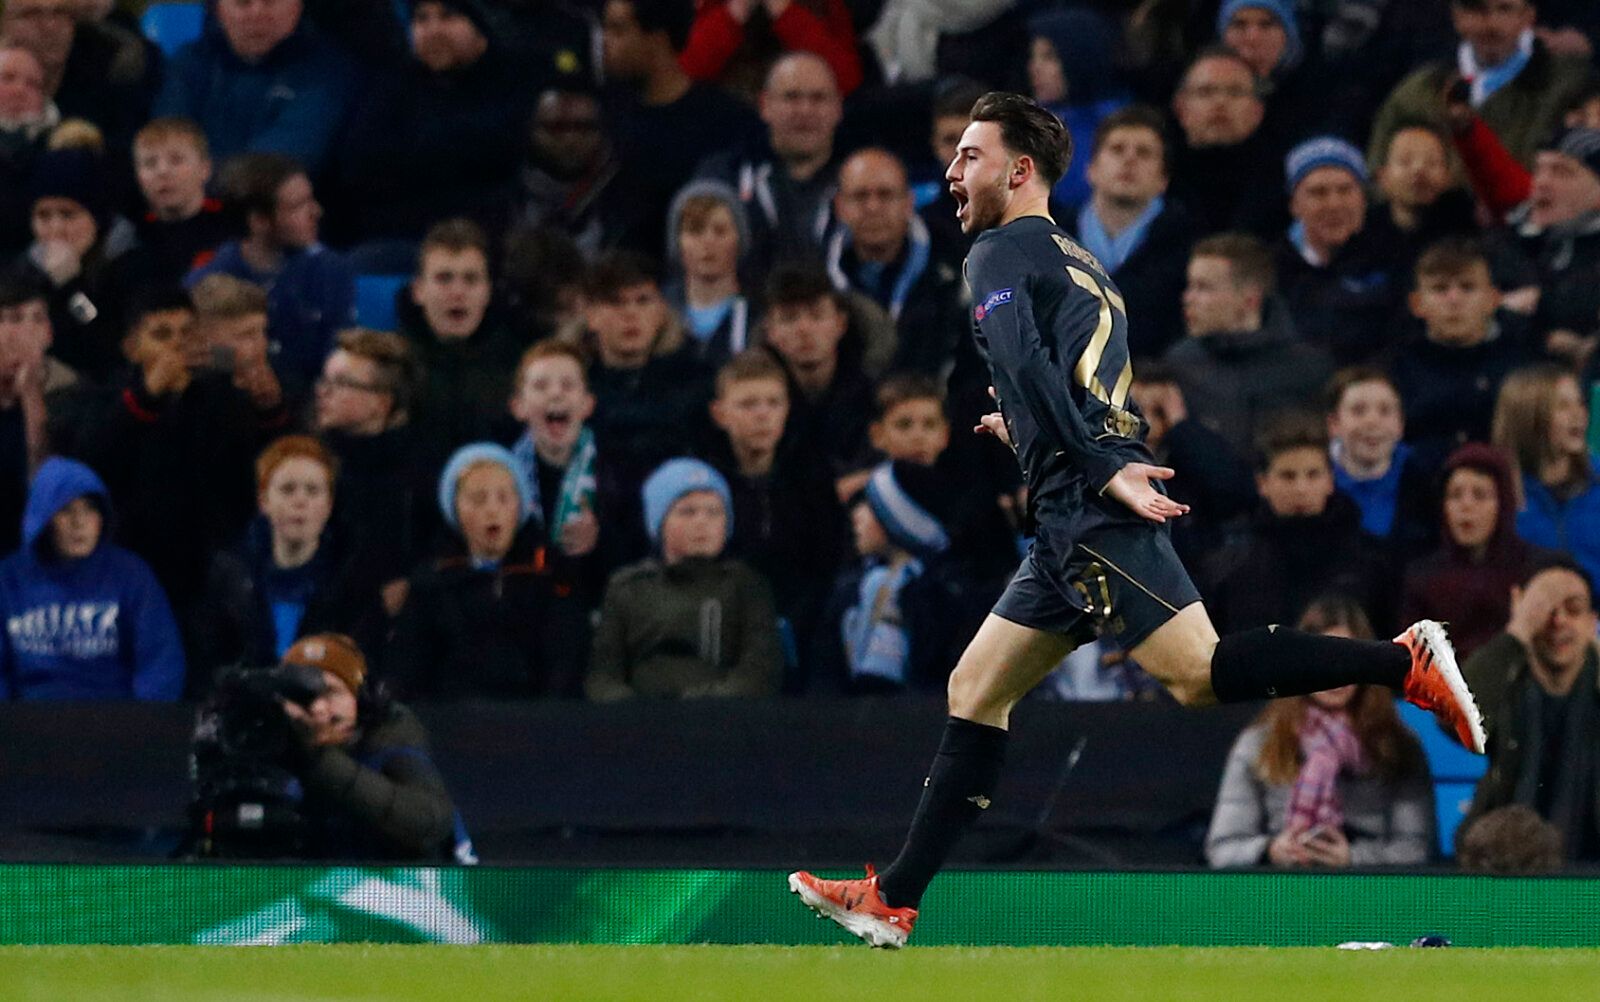 Britain Football Soccer - Manchester City v Celtic - UEFA Champions League Group Stage - Group C - Etihad Stadium, Manchester, England - 6/12/16 Celtic's Patrick Roberts celebrates scoring their first goal  Reuters / Phil Noble Livepic EDITORIAL USE ONLY.